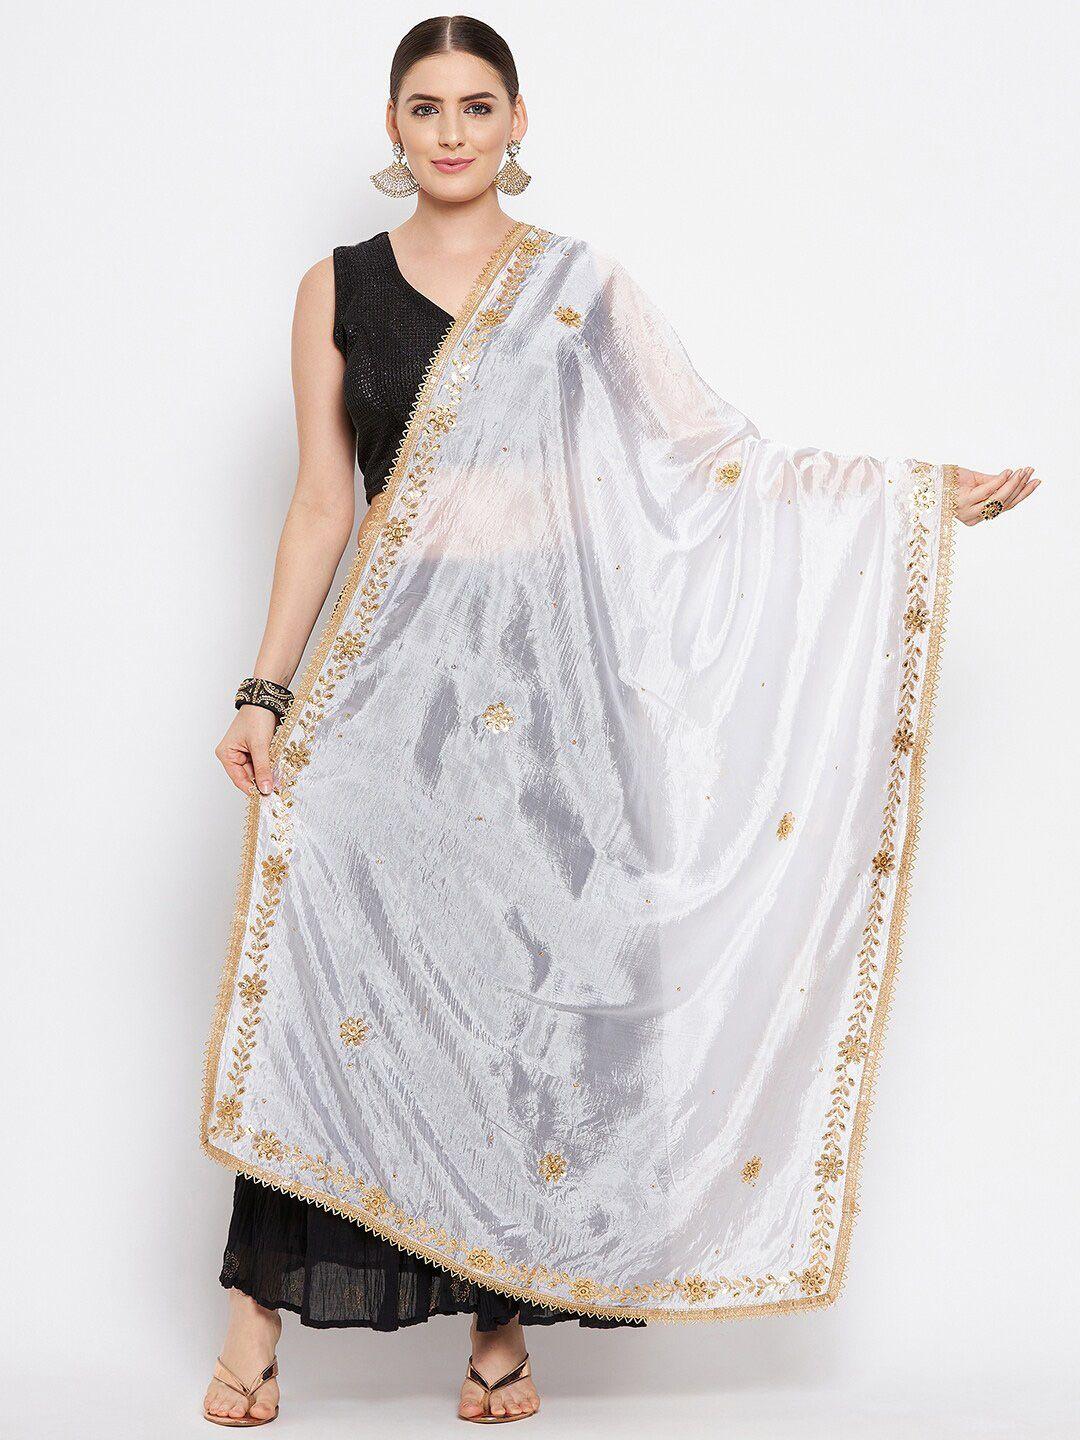 Clora Creation White & Gold-Toned Embroidered Dupatta with Beads and Stones